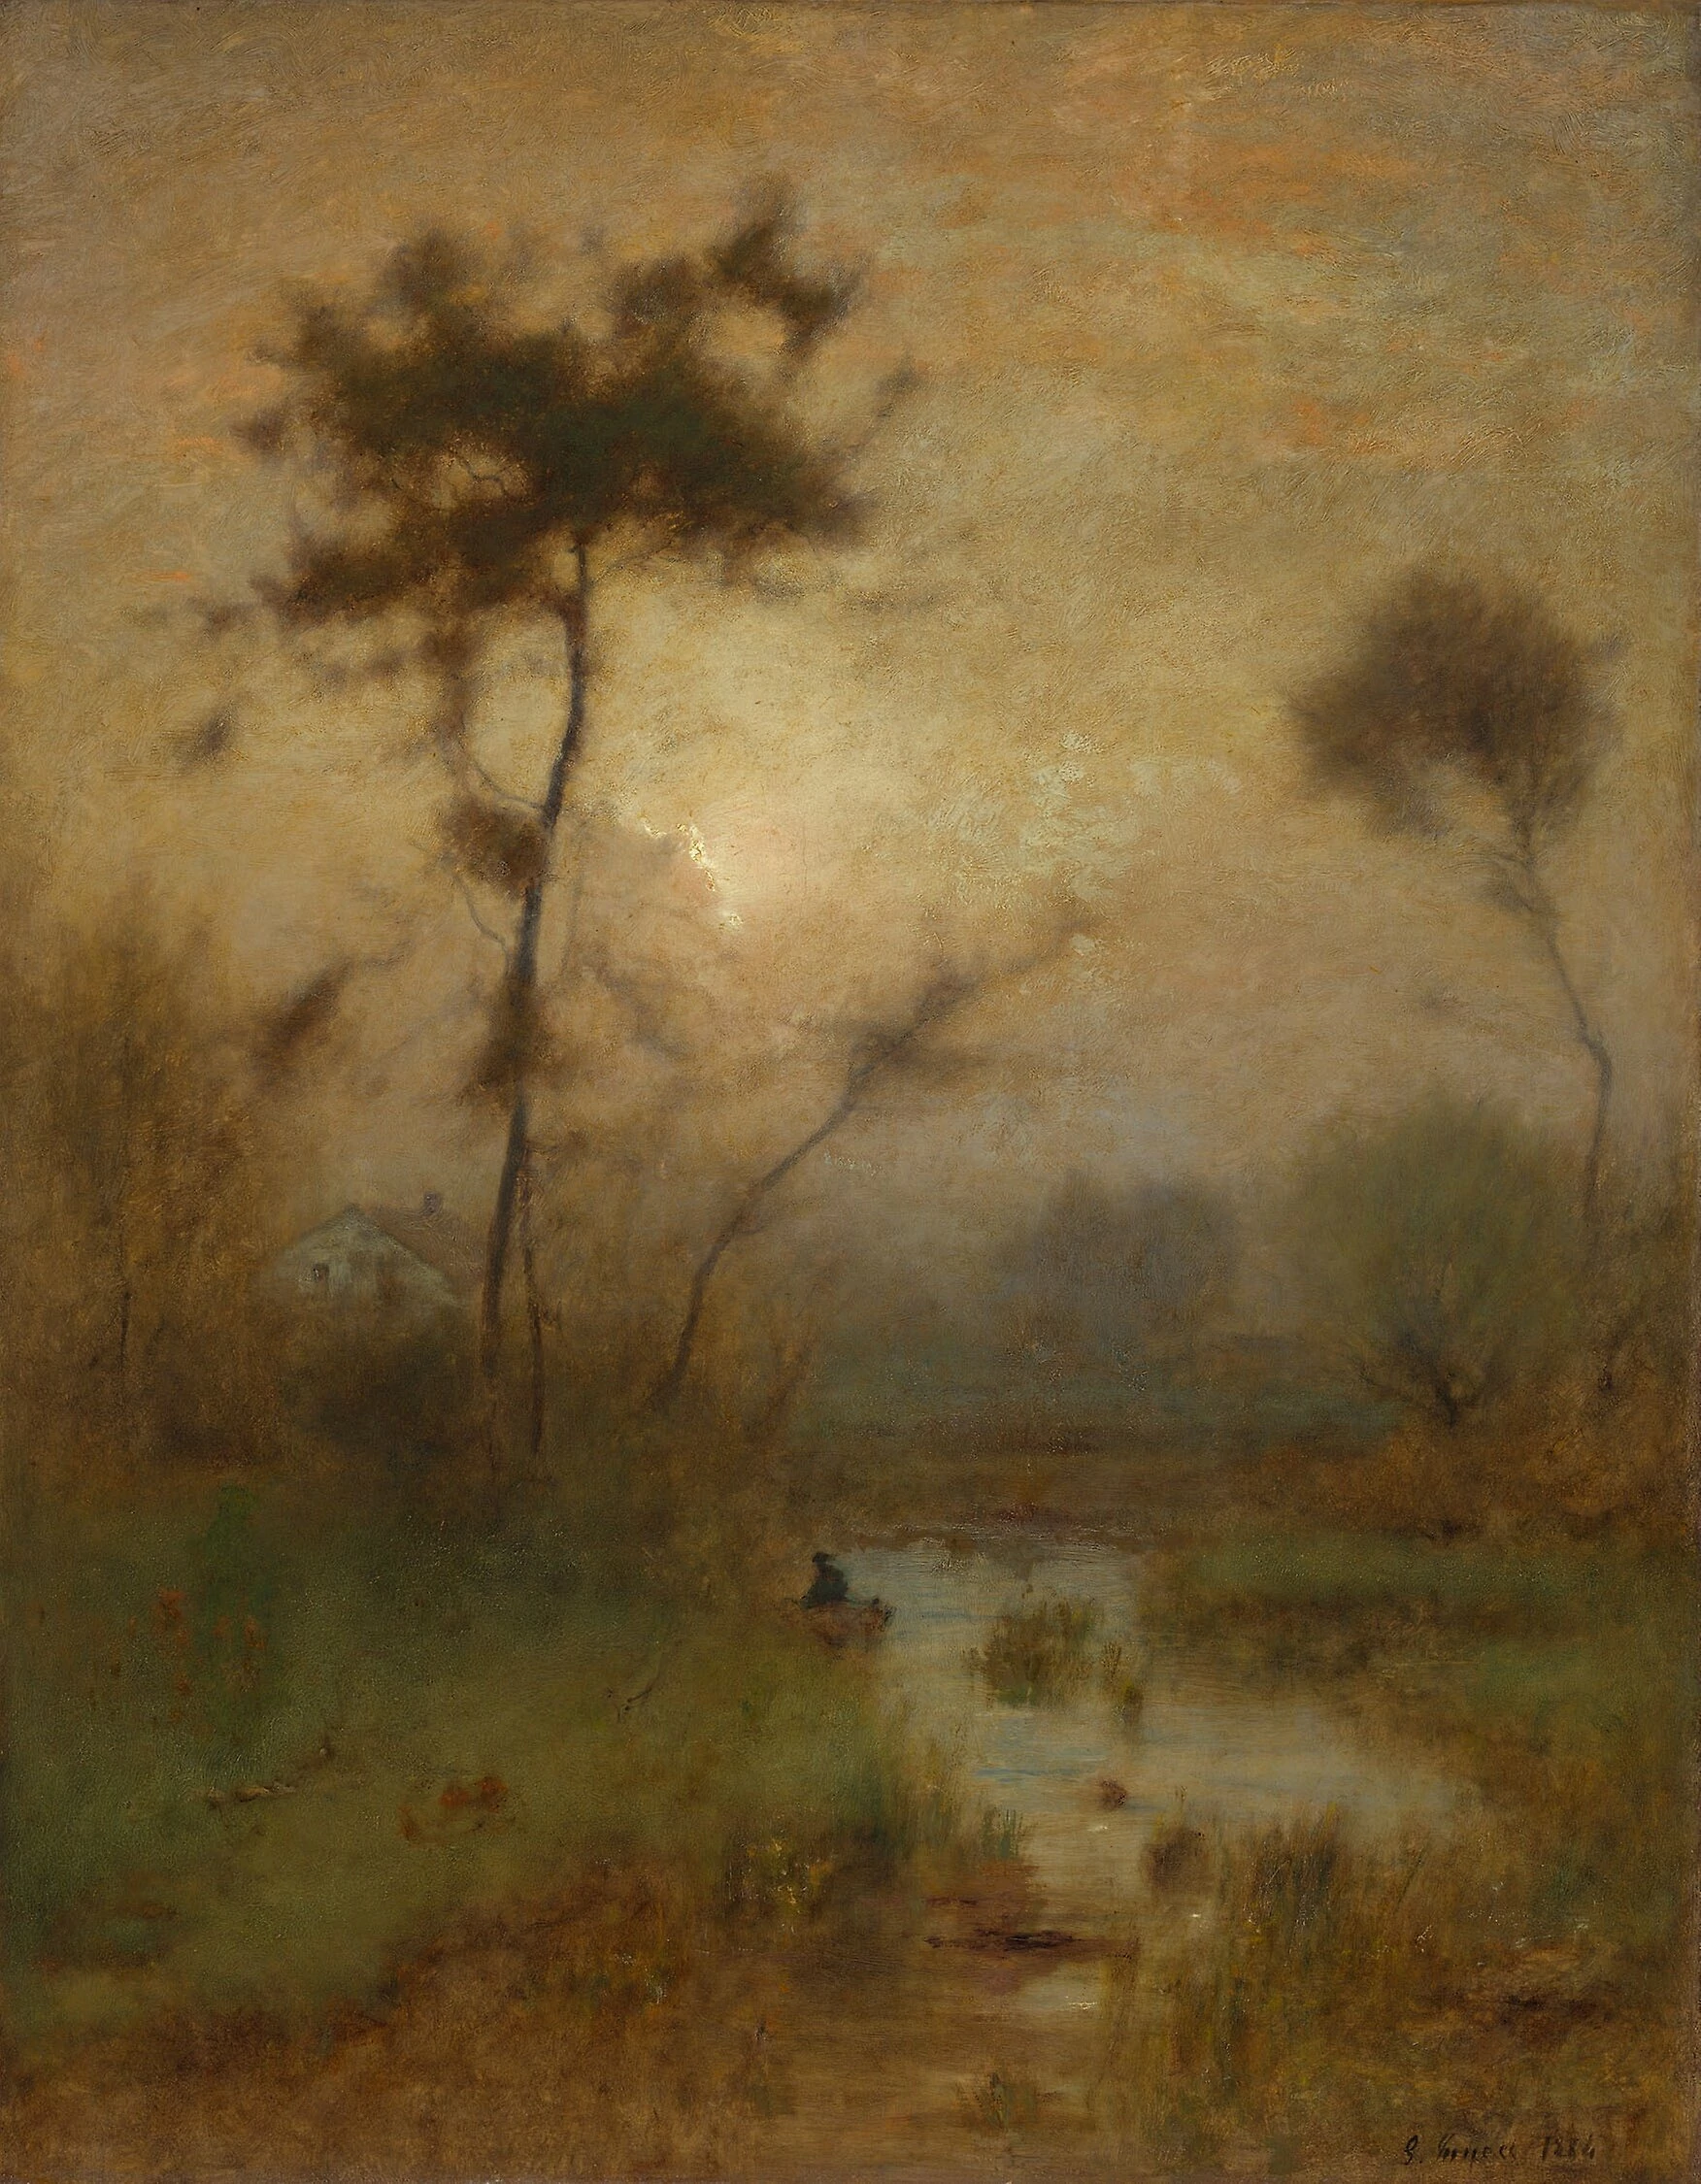 A Silver Morning, George Inness